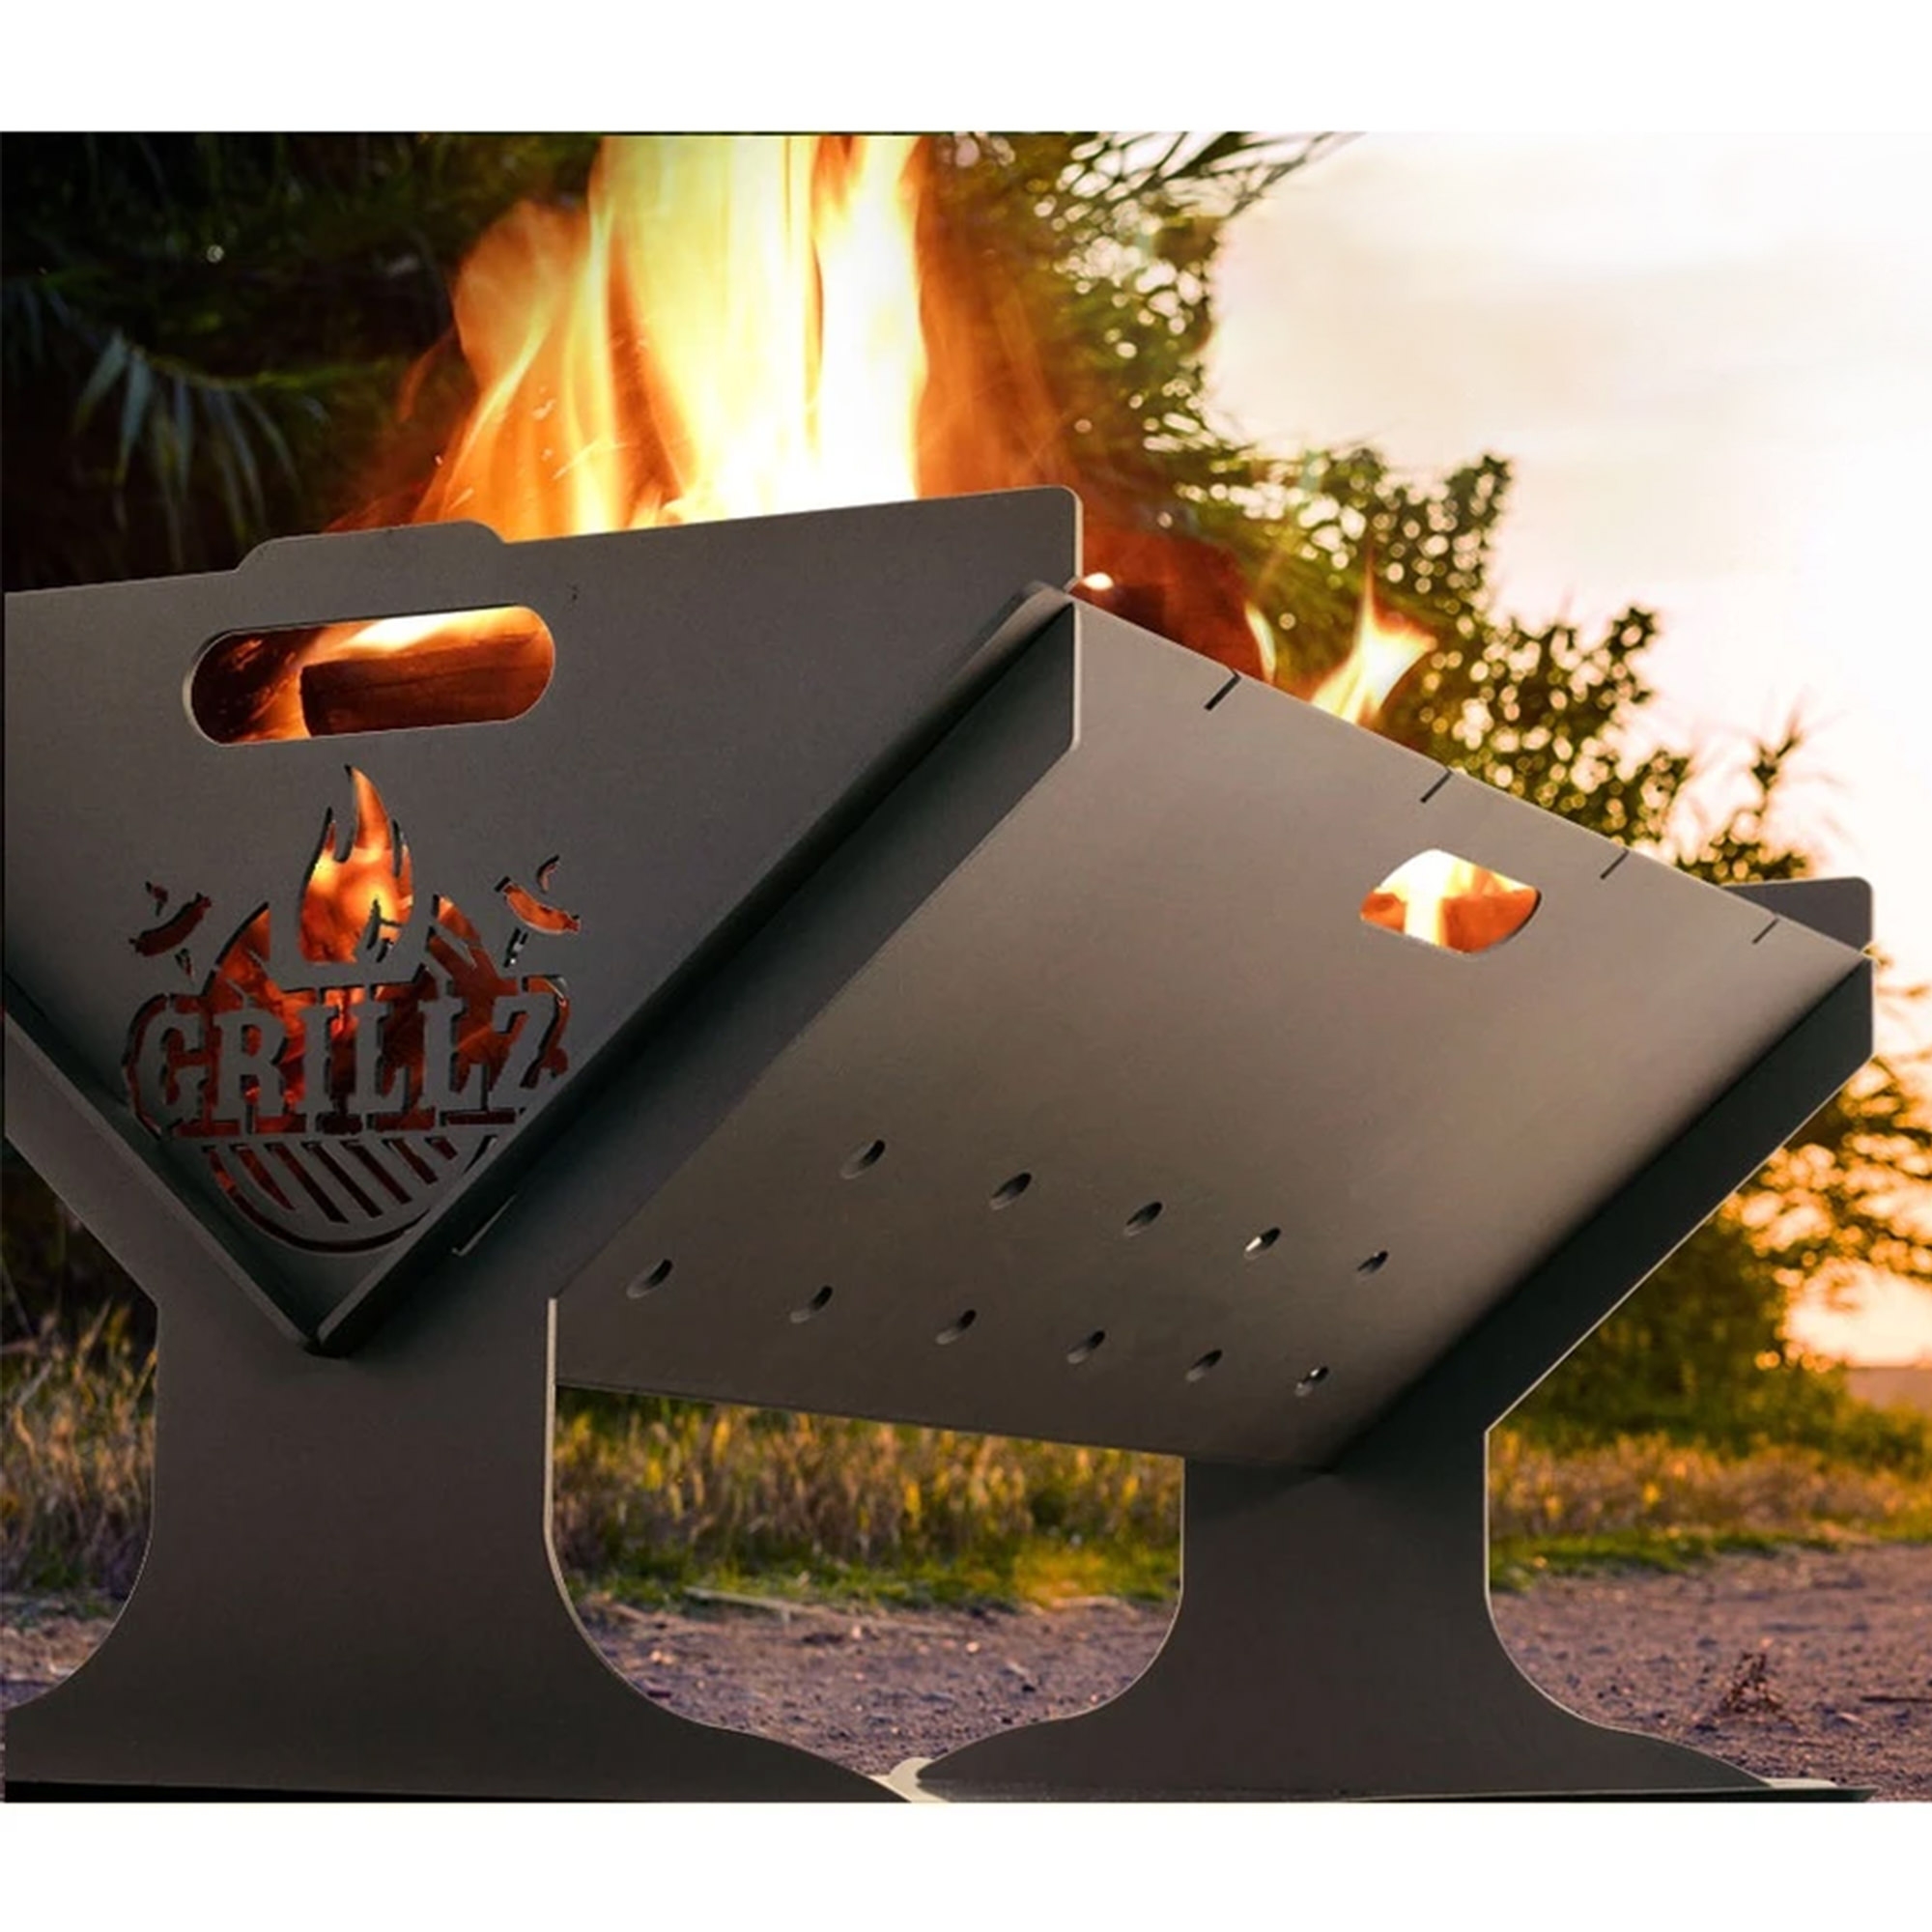 Grillz Stainless Steel Portable Fire Pit and BBQ Image 2